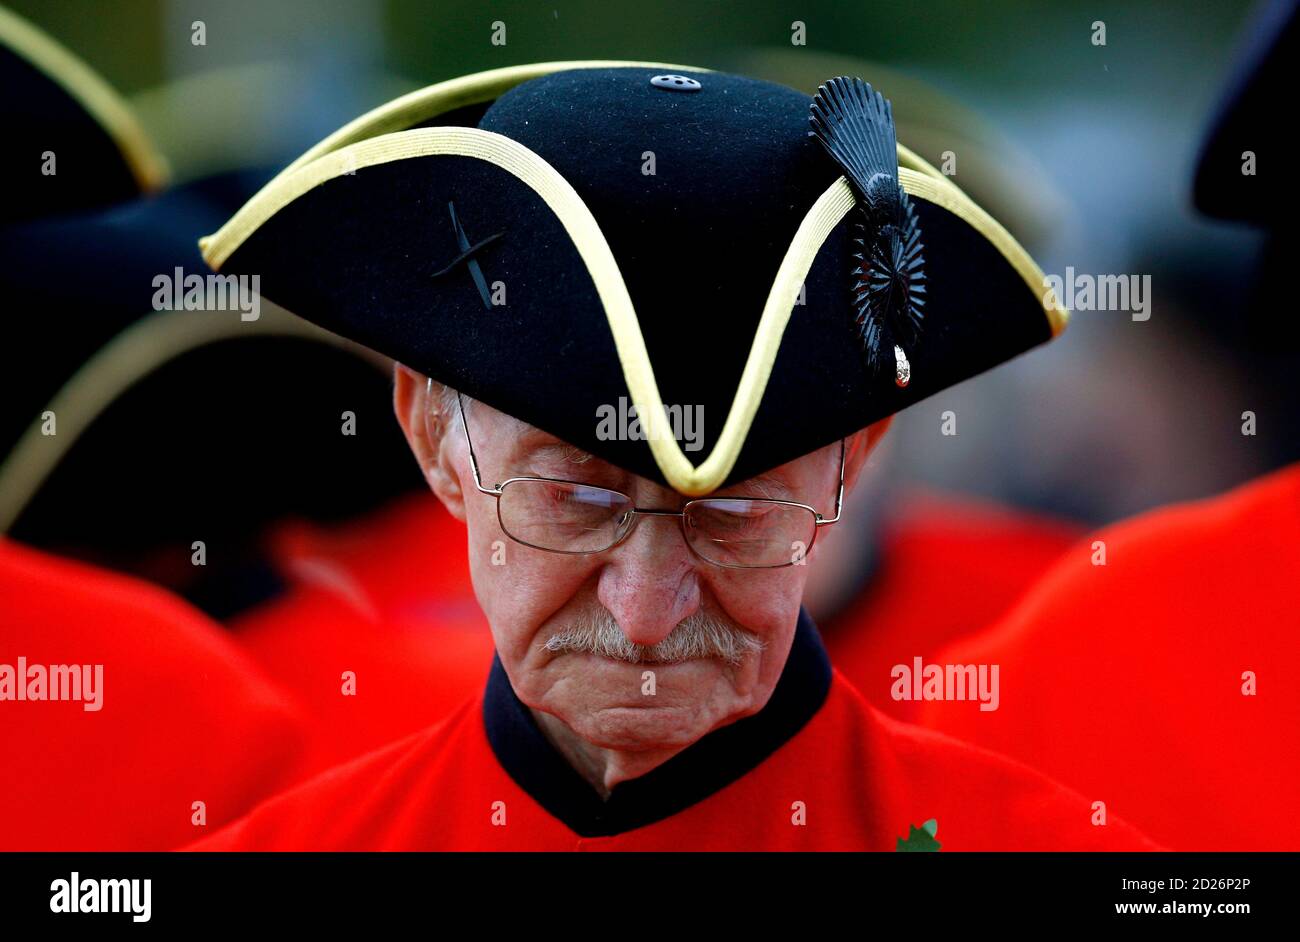 A Chelsea pensioner bows his head during the annual Remembrance Sunday ceremony on Armistice Day at Whitehall in central London November 11, 2007.    REUTERS/Dylan Martinez     (BRITAIN) Stock Photo